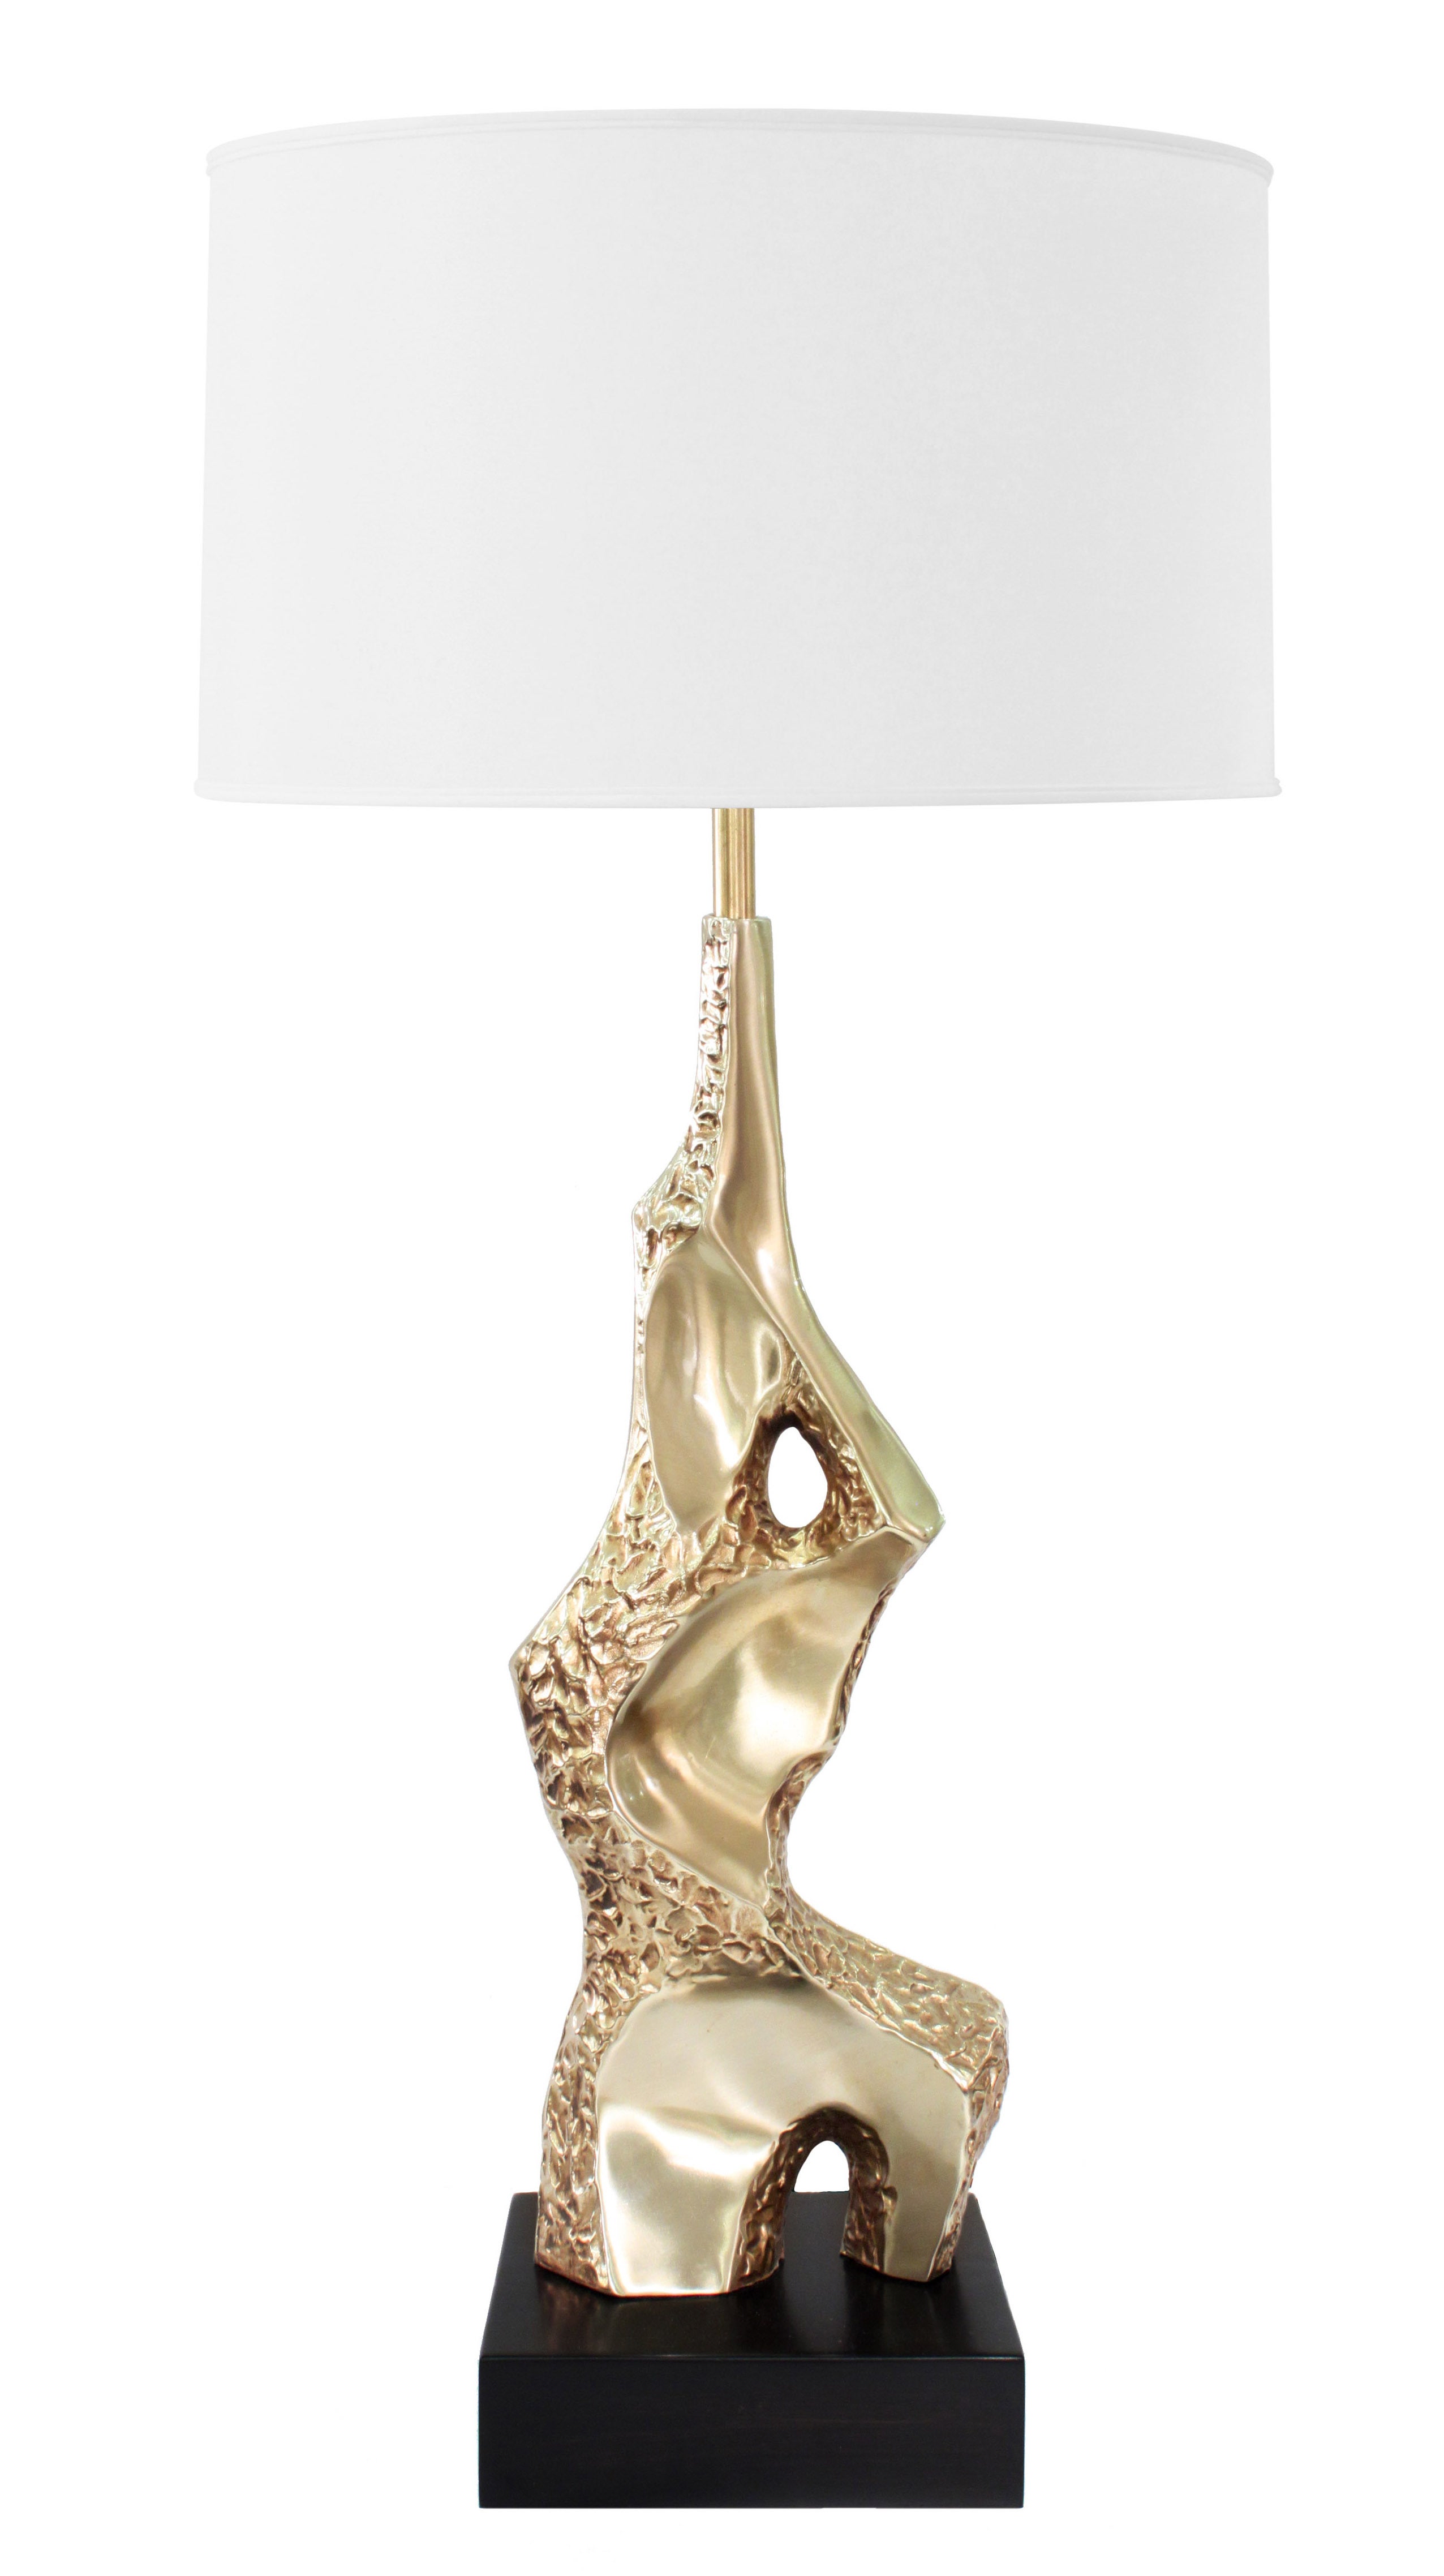 Sculptural Table Lamp in Brushed Brass by Laurel Lighting